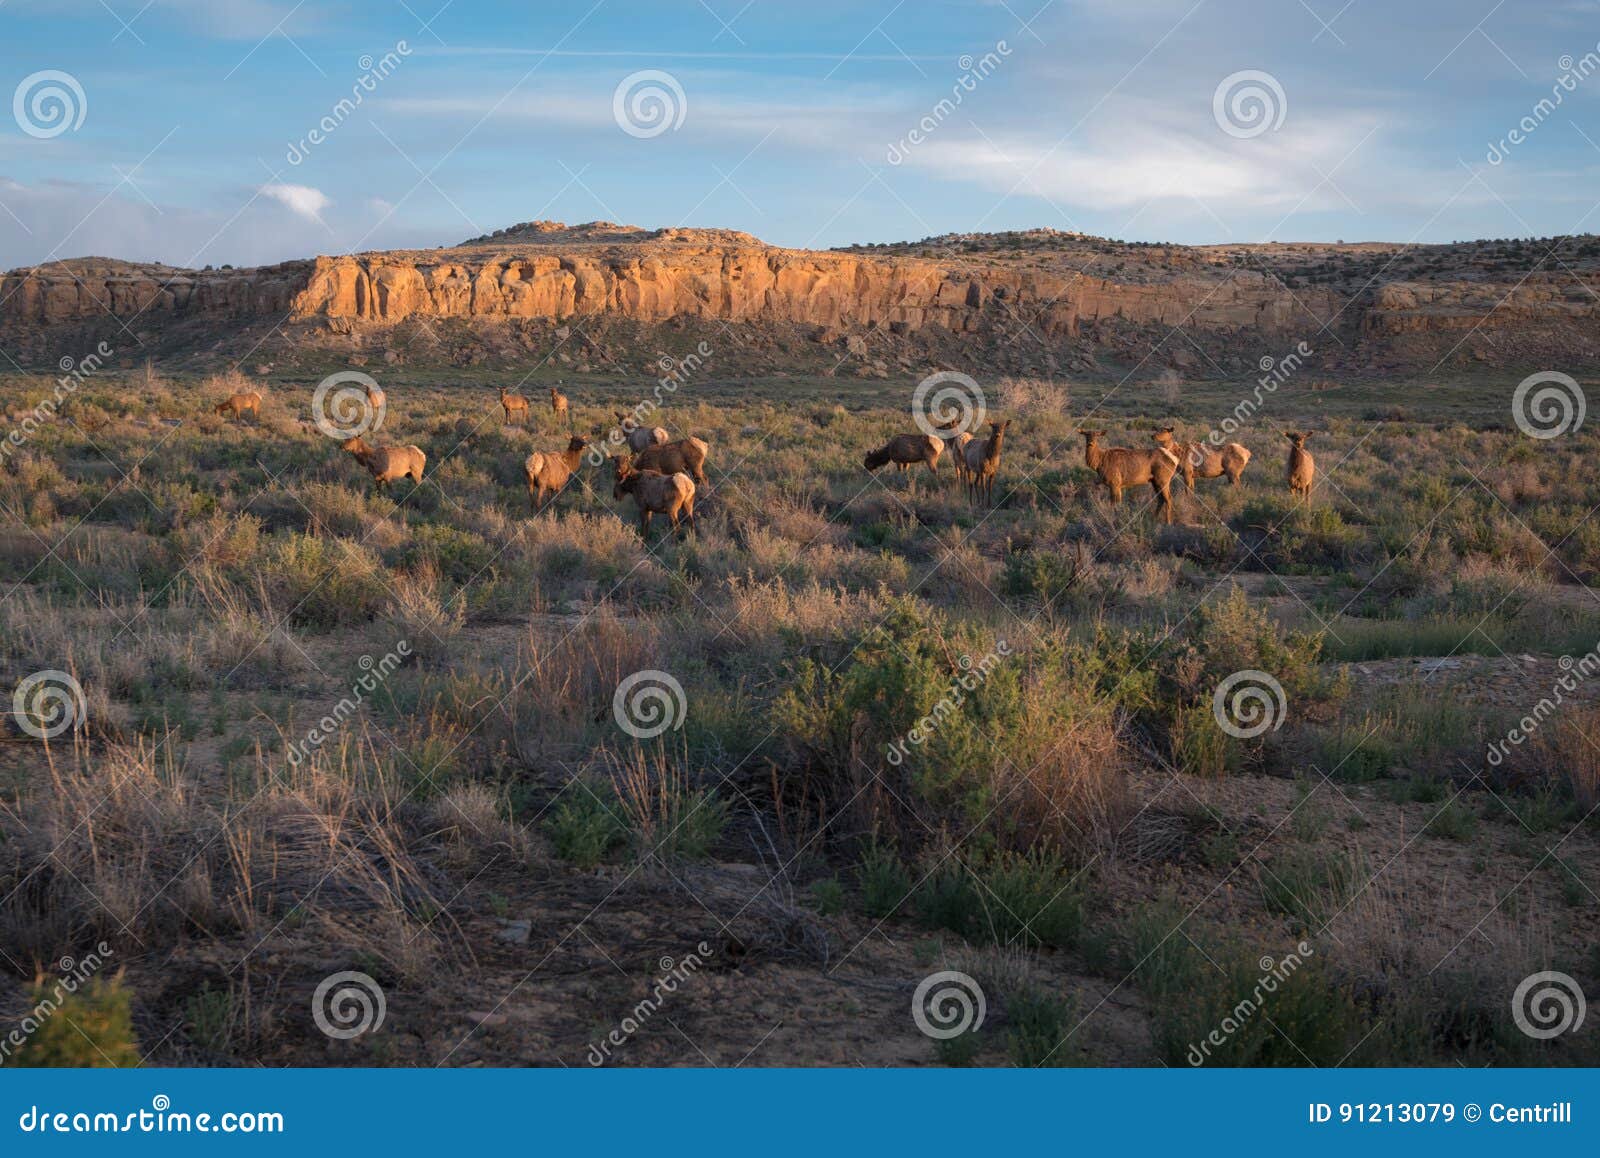 herd of elk, chaco canyon national park